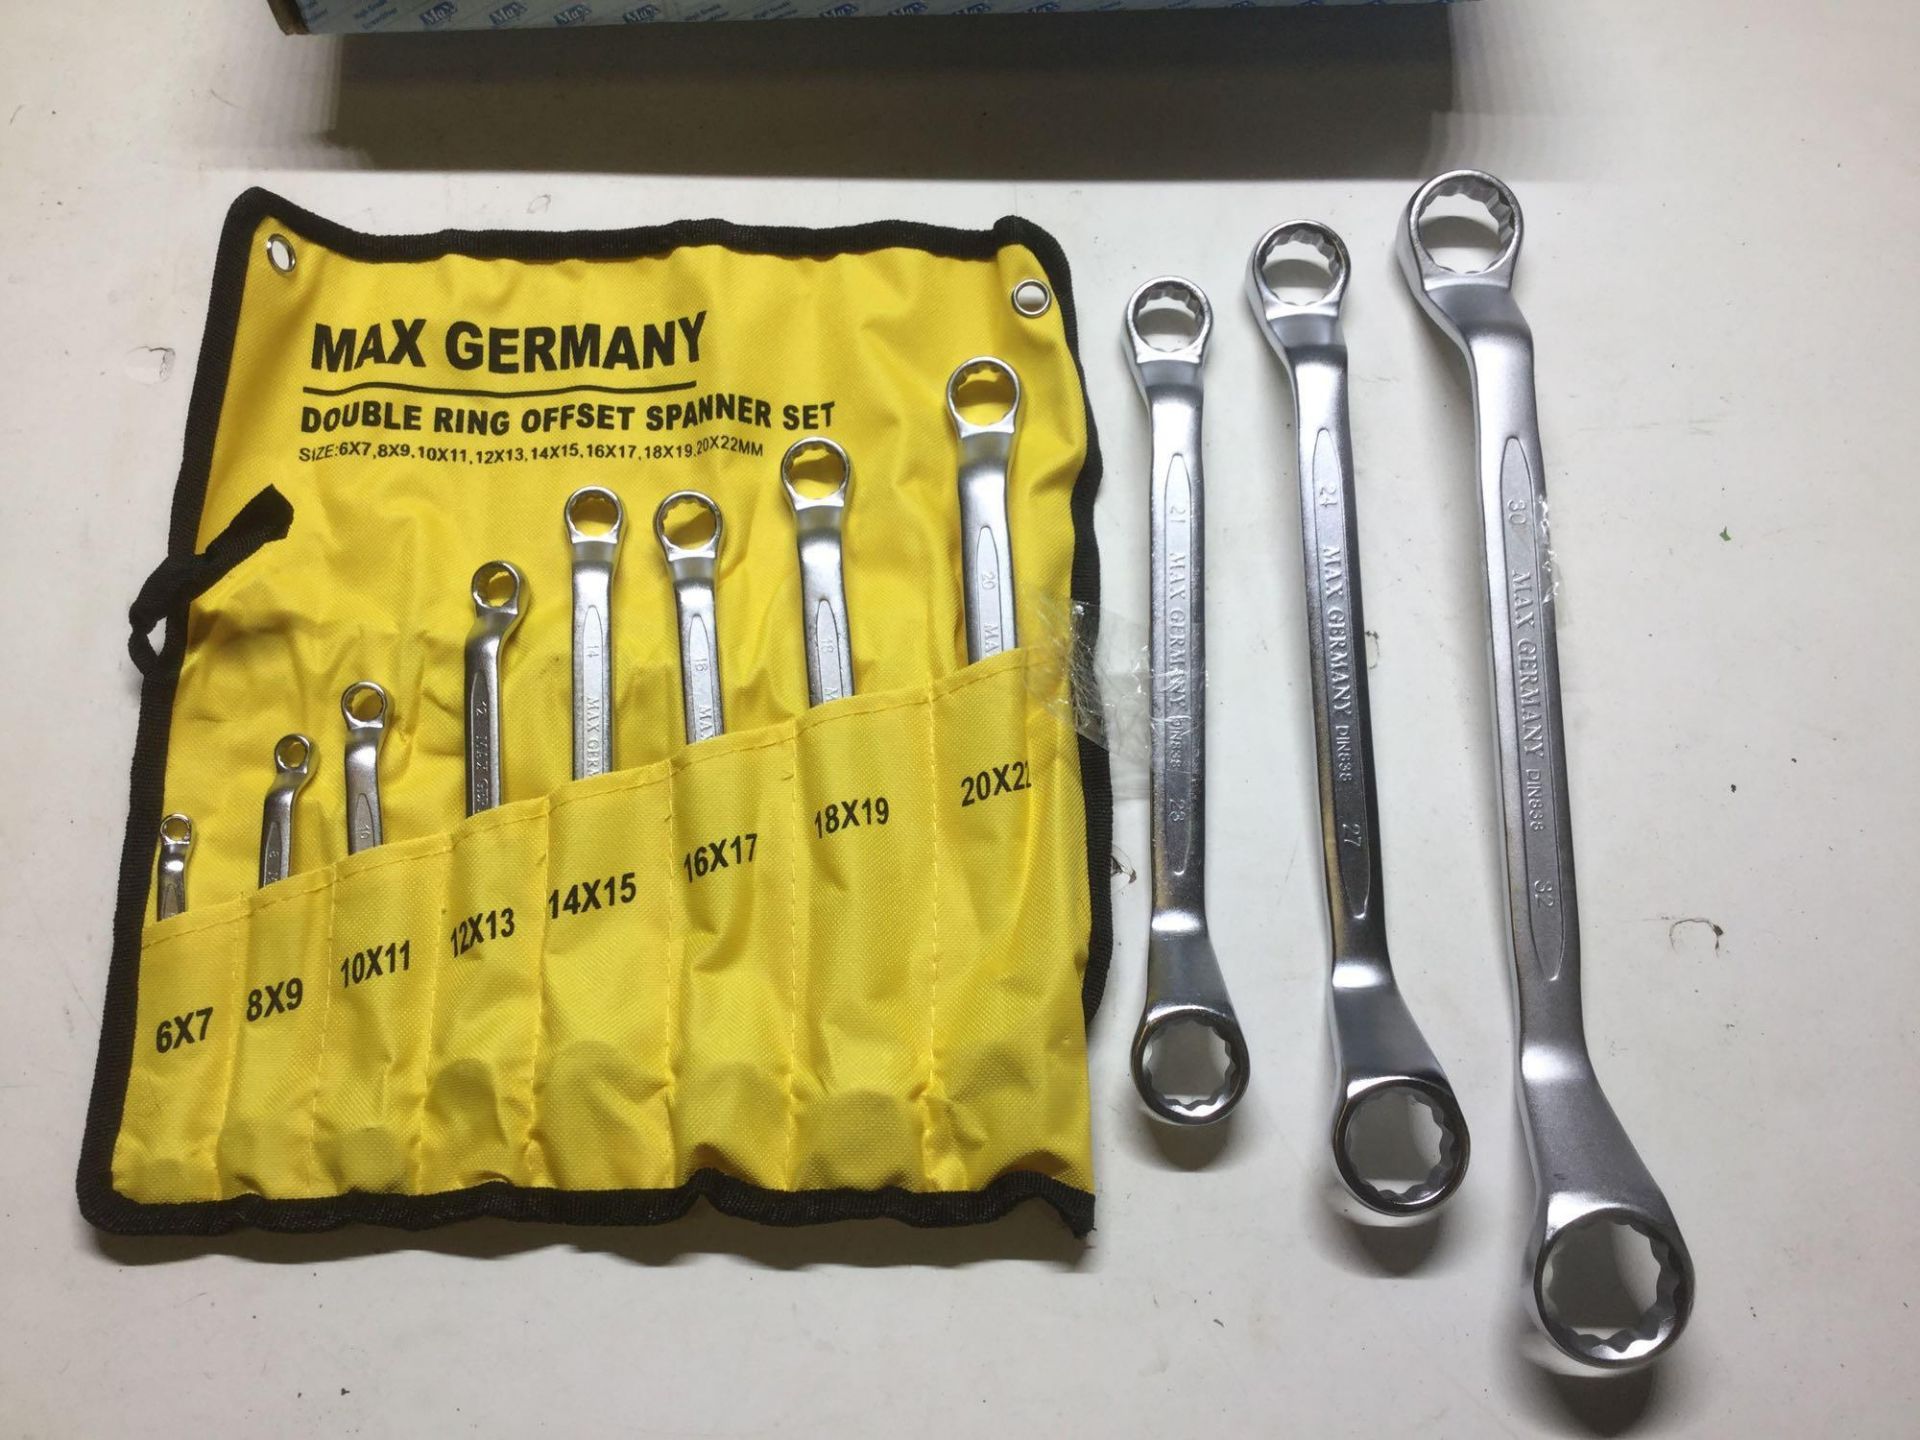 Max Germany double ring offset spanner set